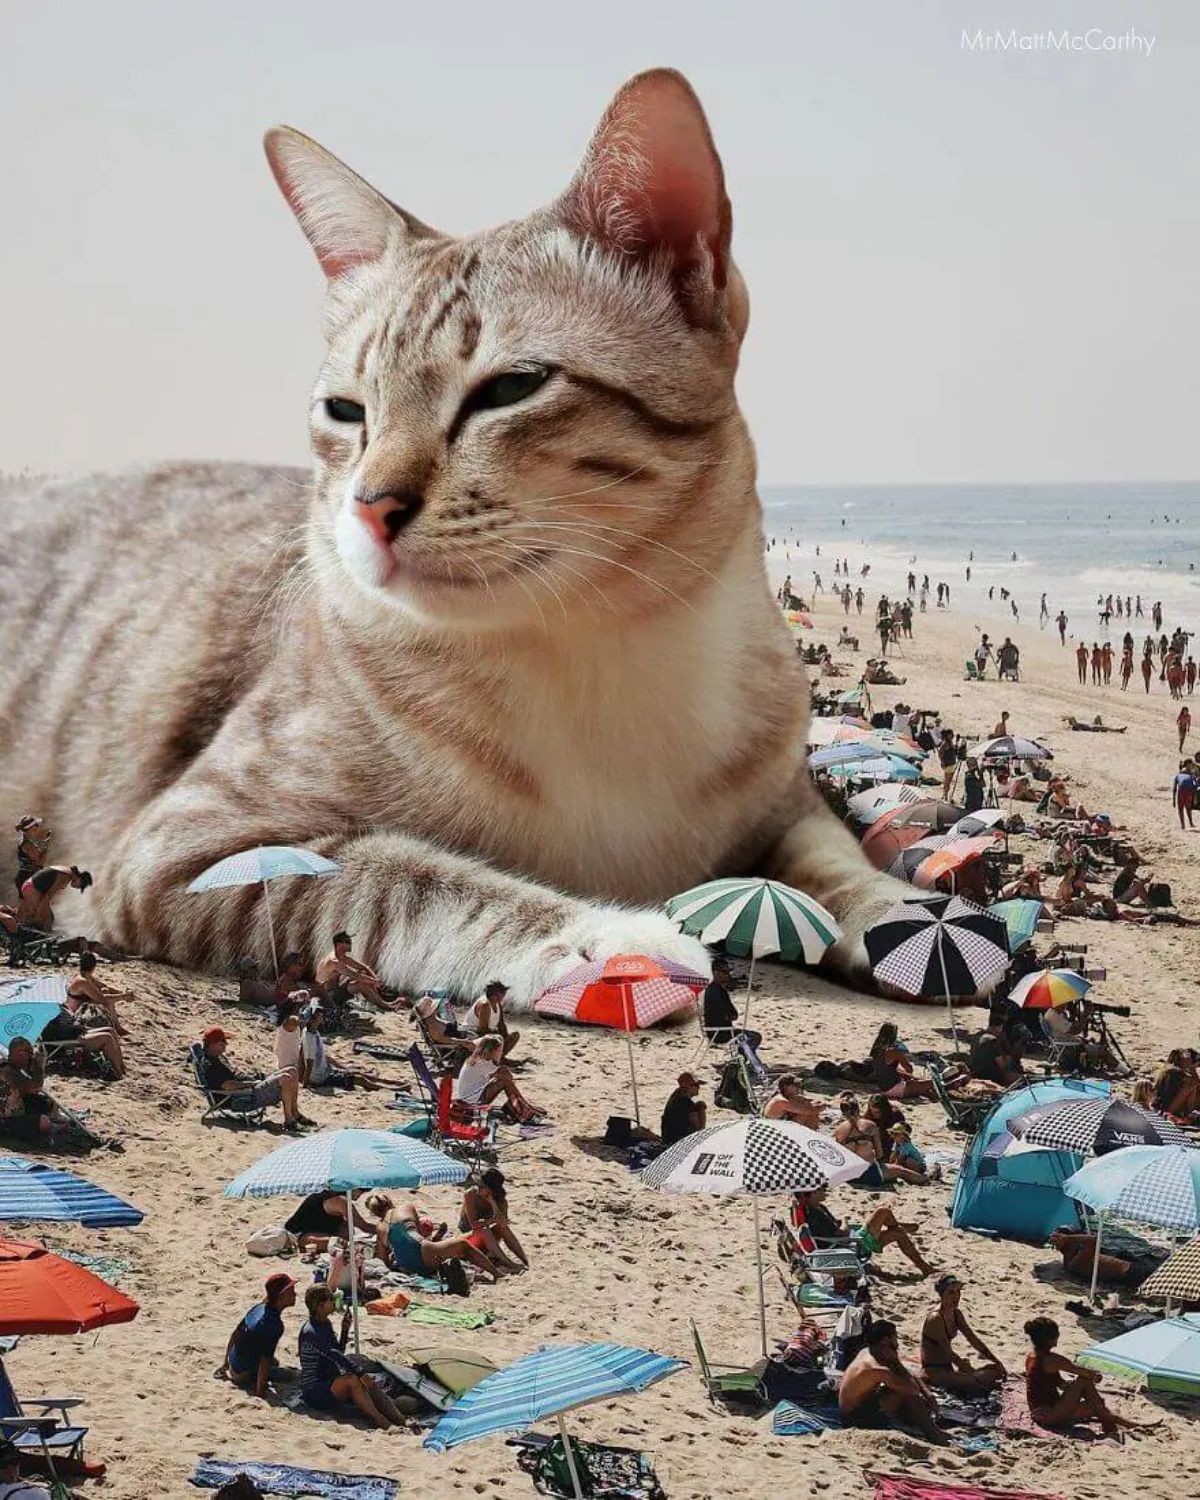 large photoshopped grey and white cat laying on a beach surrounded by people